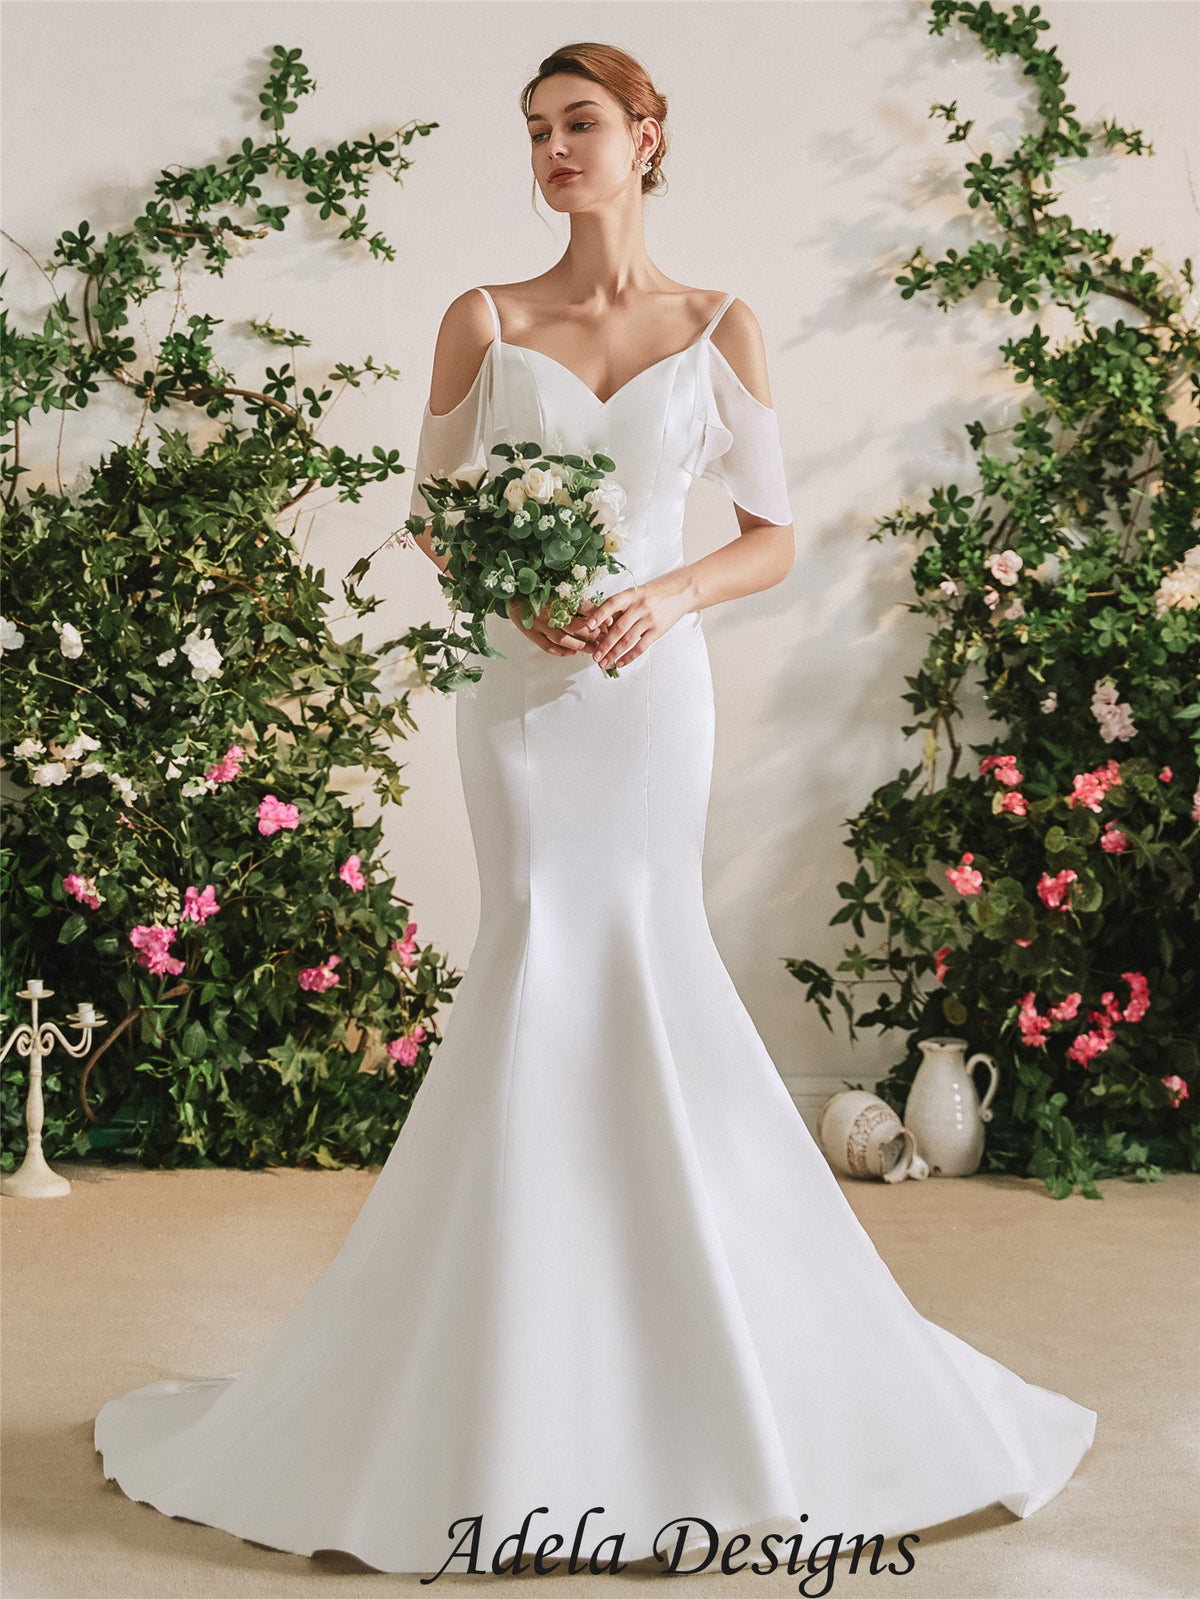 Mermaid Satin Wedding Dress Bridal Gown With Off The Shoulder Neckline Sleeveless with Straps